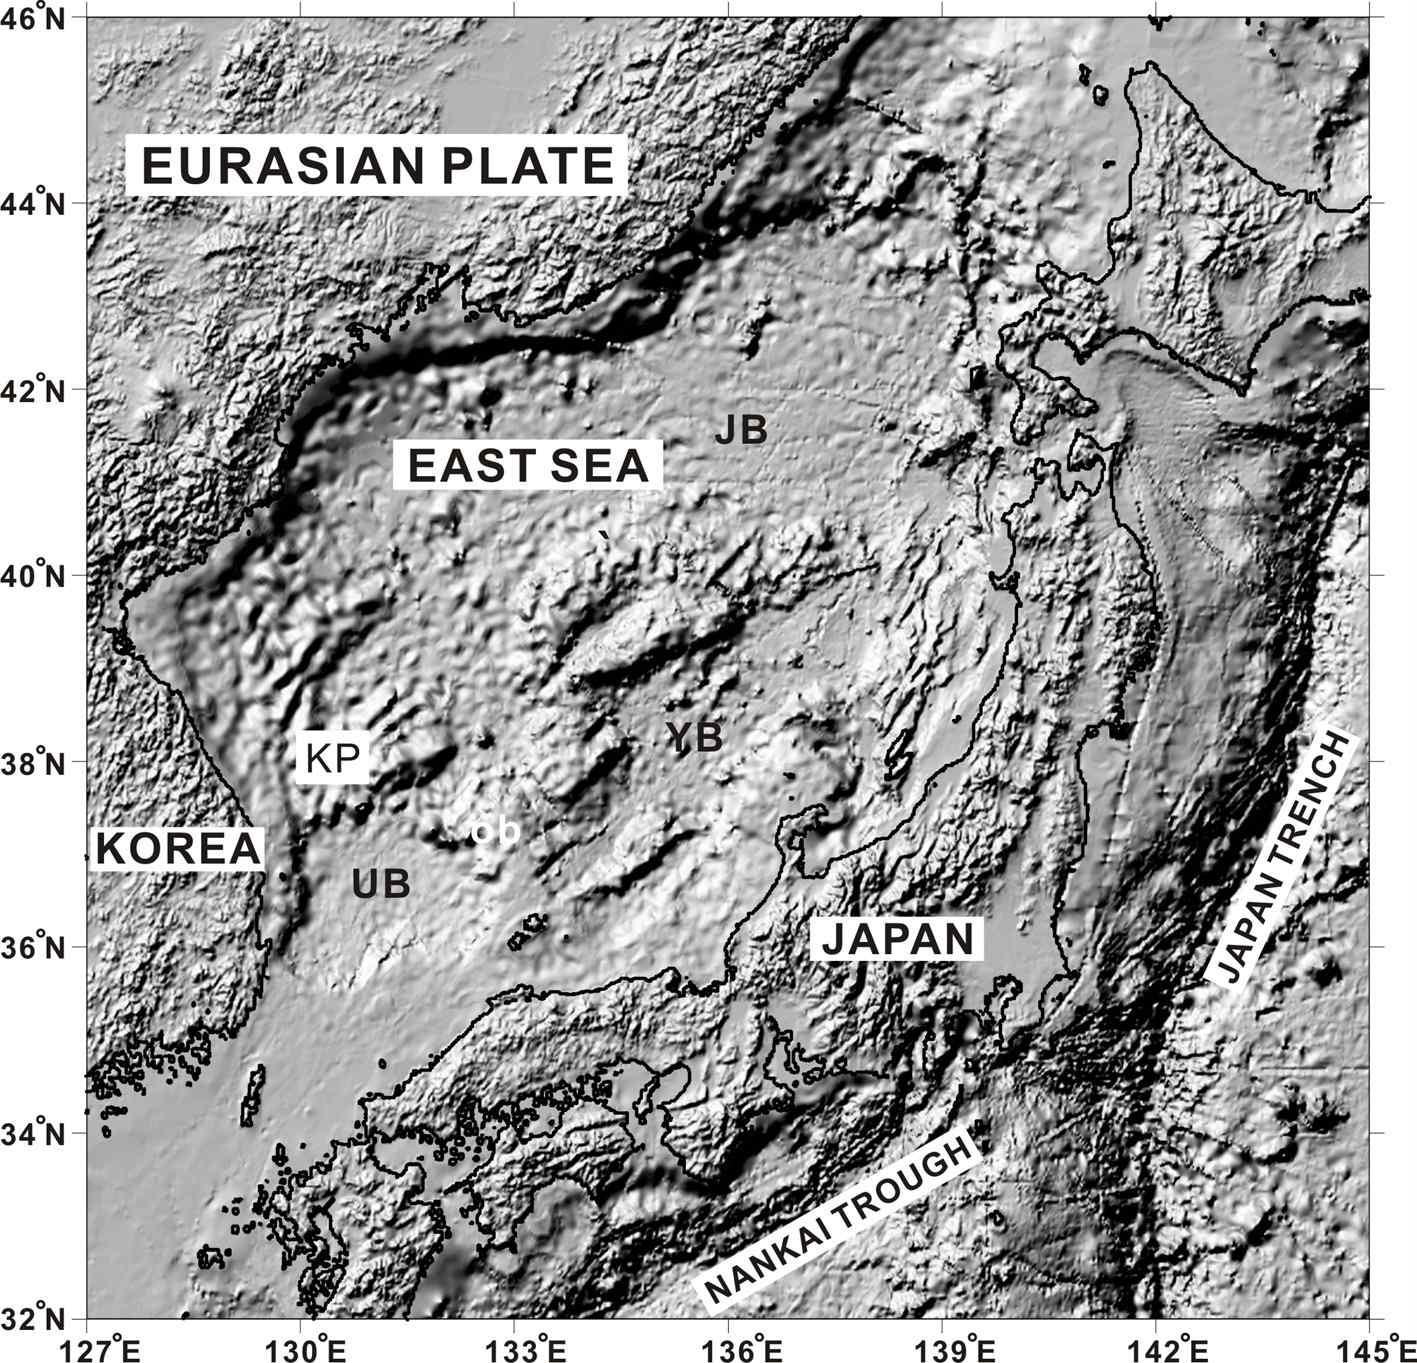 (a) Physiography of the East Sea (Japan Sea). KP = Korea Plateau and UB = Ulleung Basin. (b) Shaded bathymetry of the eastern margin of Korea from swath bathymetry data. The Hupo Basin and the Hupo Bank are outlined. HP = Hupo Basin and HB = Hupo Bank.